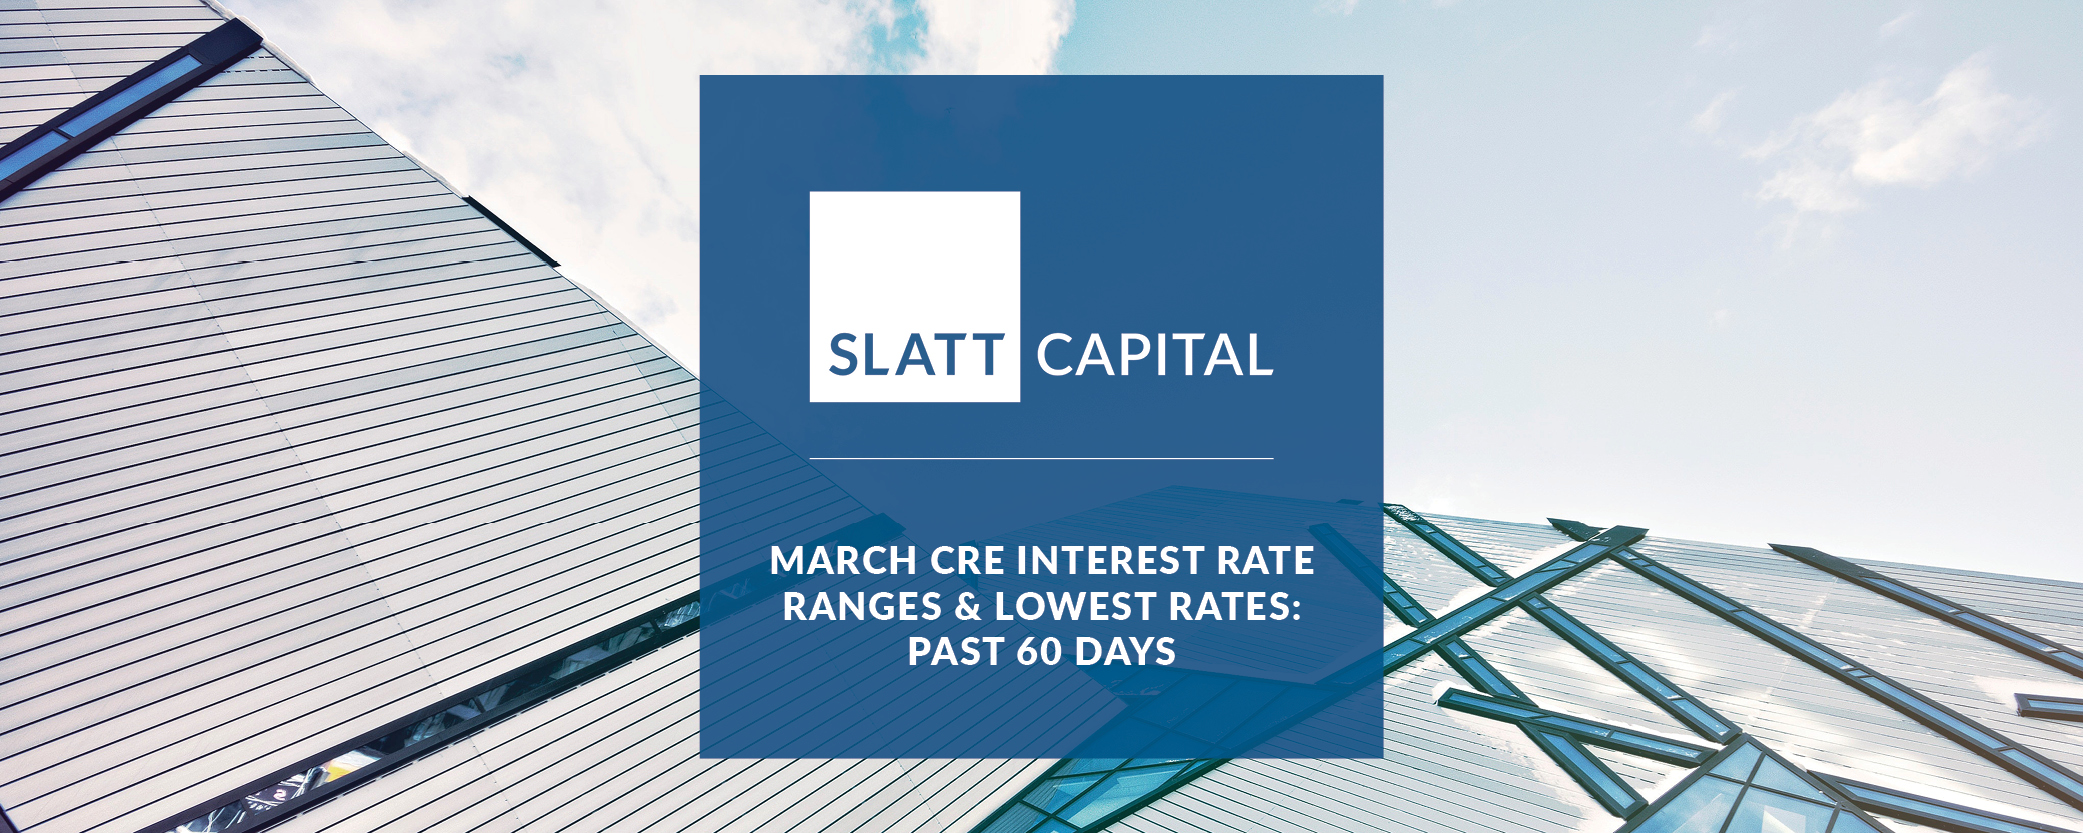 March cre interest rate ranges & lowest rates: past 60 days